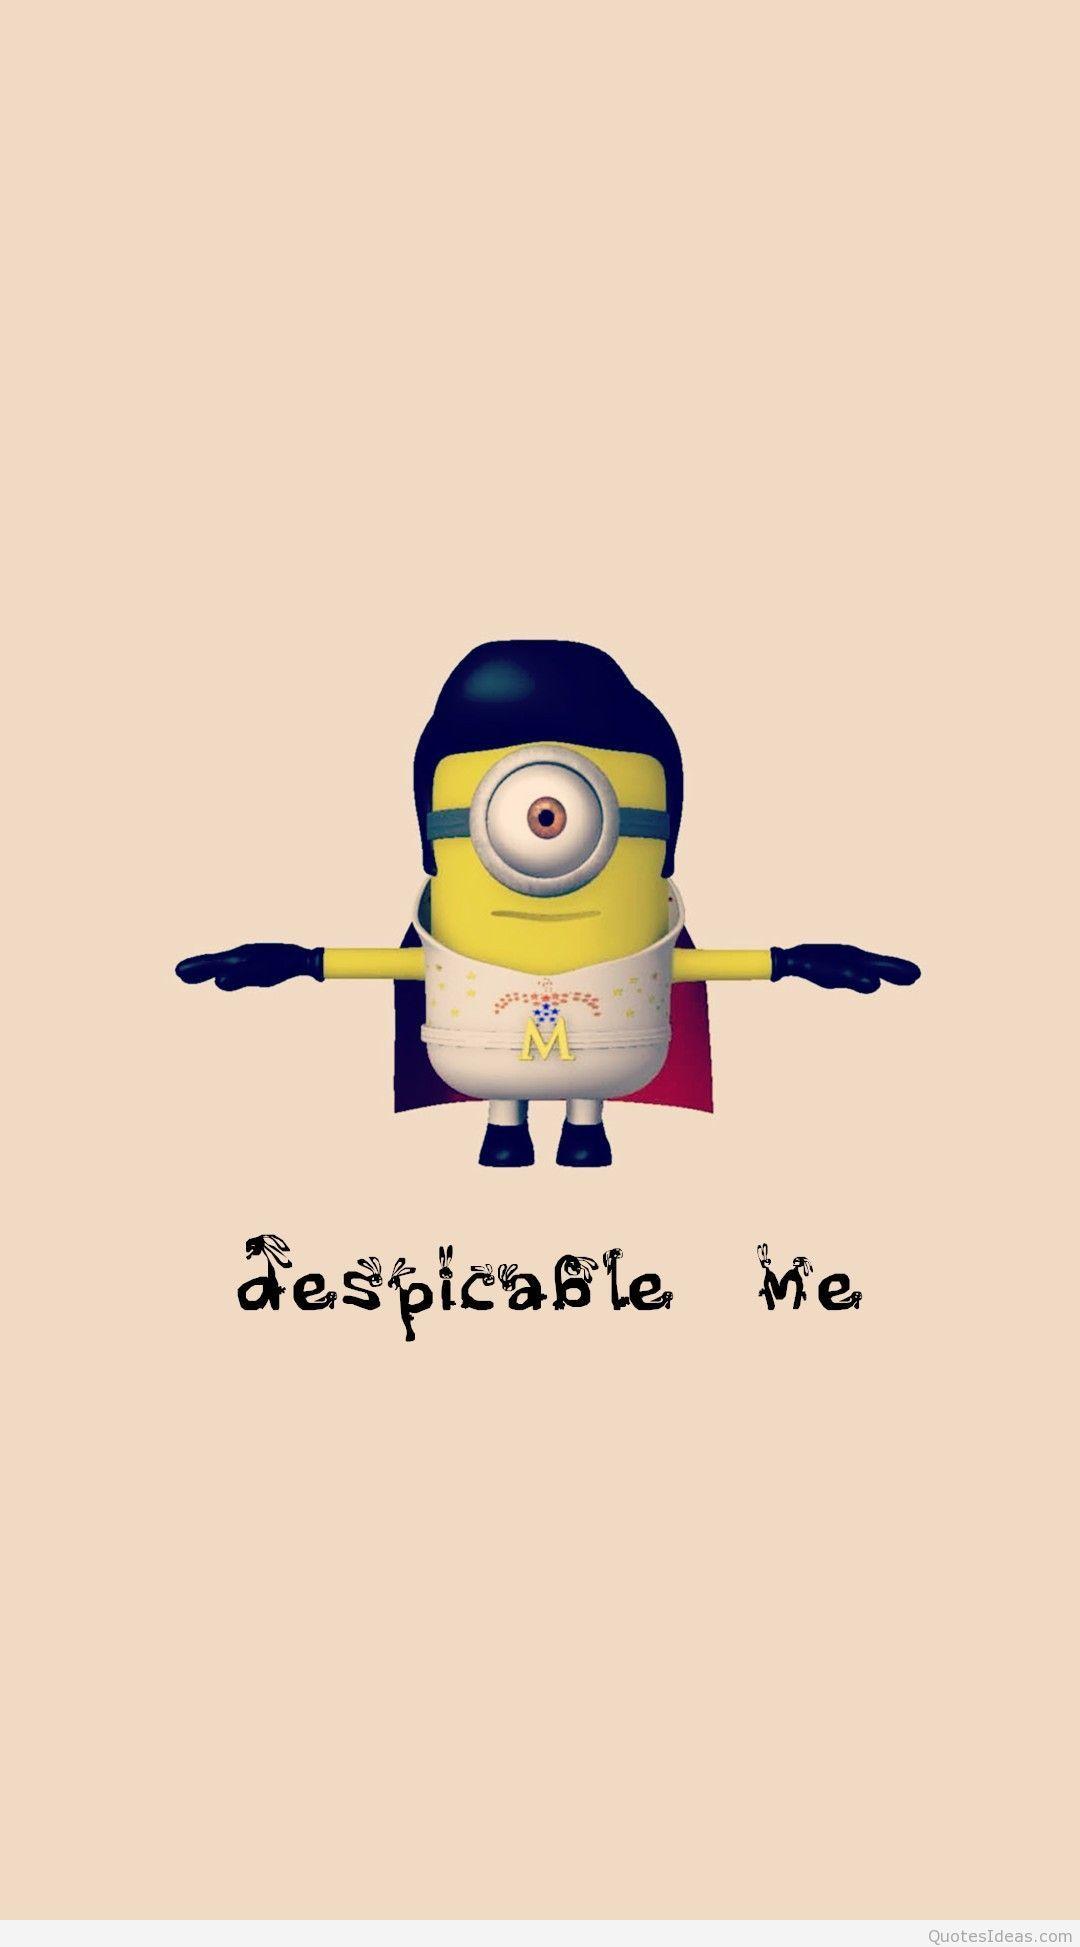 Awesome minions background HD free download